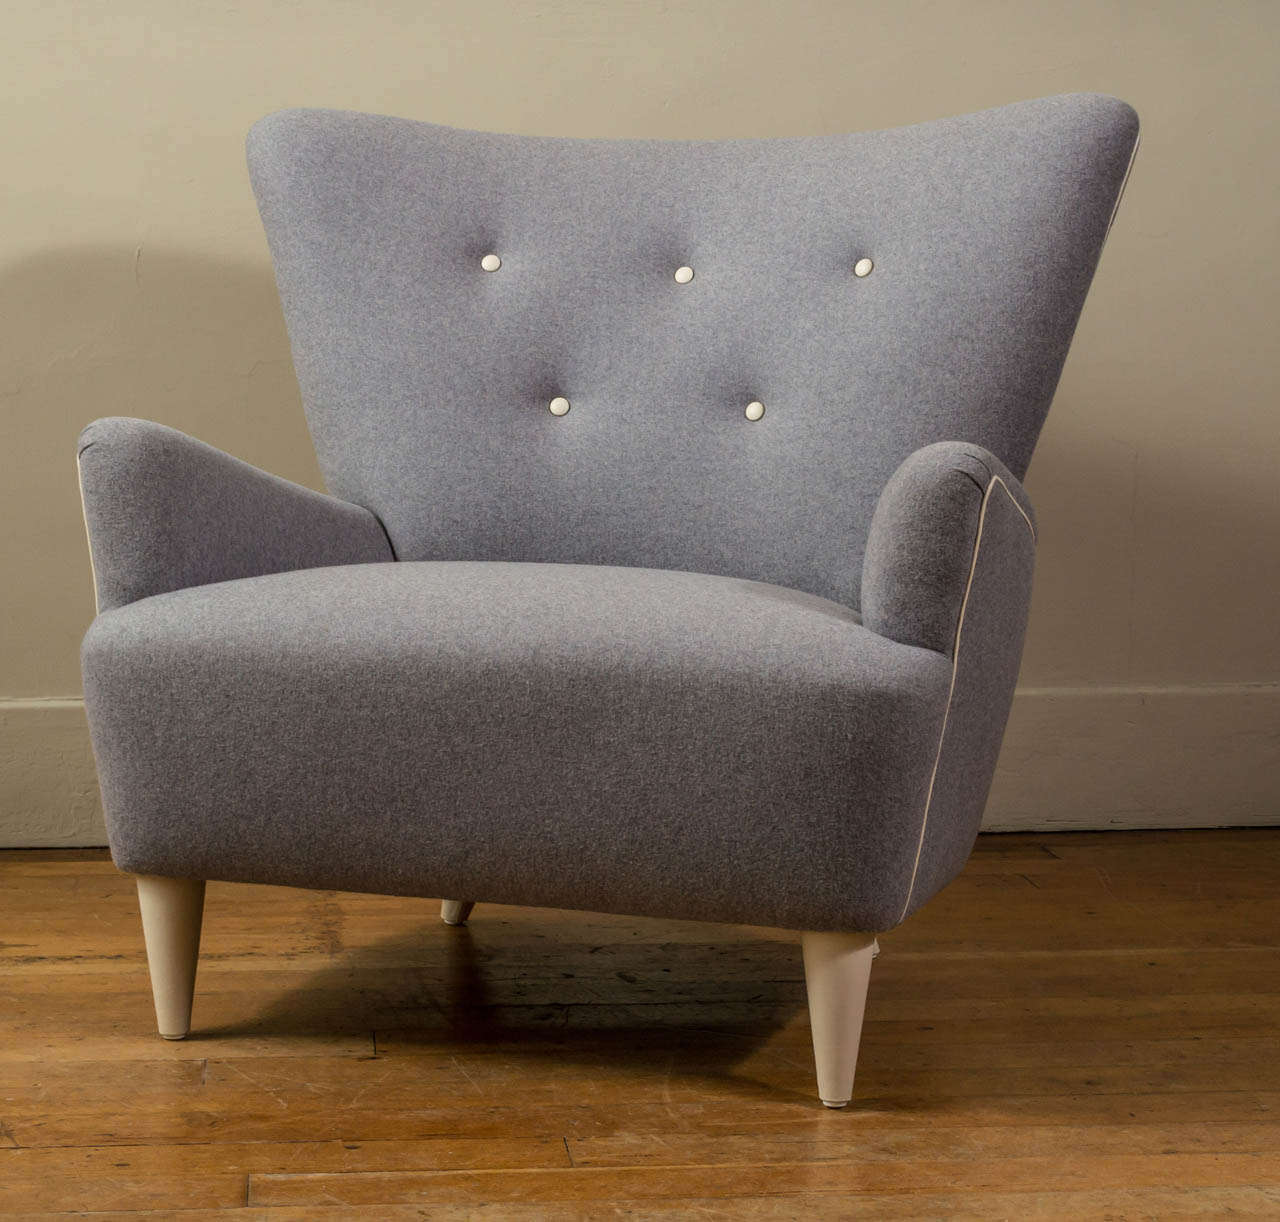 A generous custom Mid-20th Century inspired American armchair in Italian grey wool with bone leather trim and wrapped oak feet.